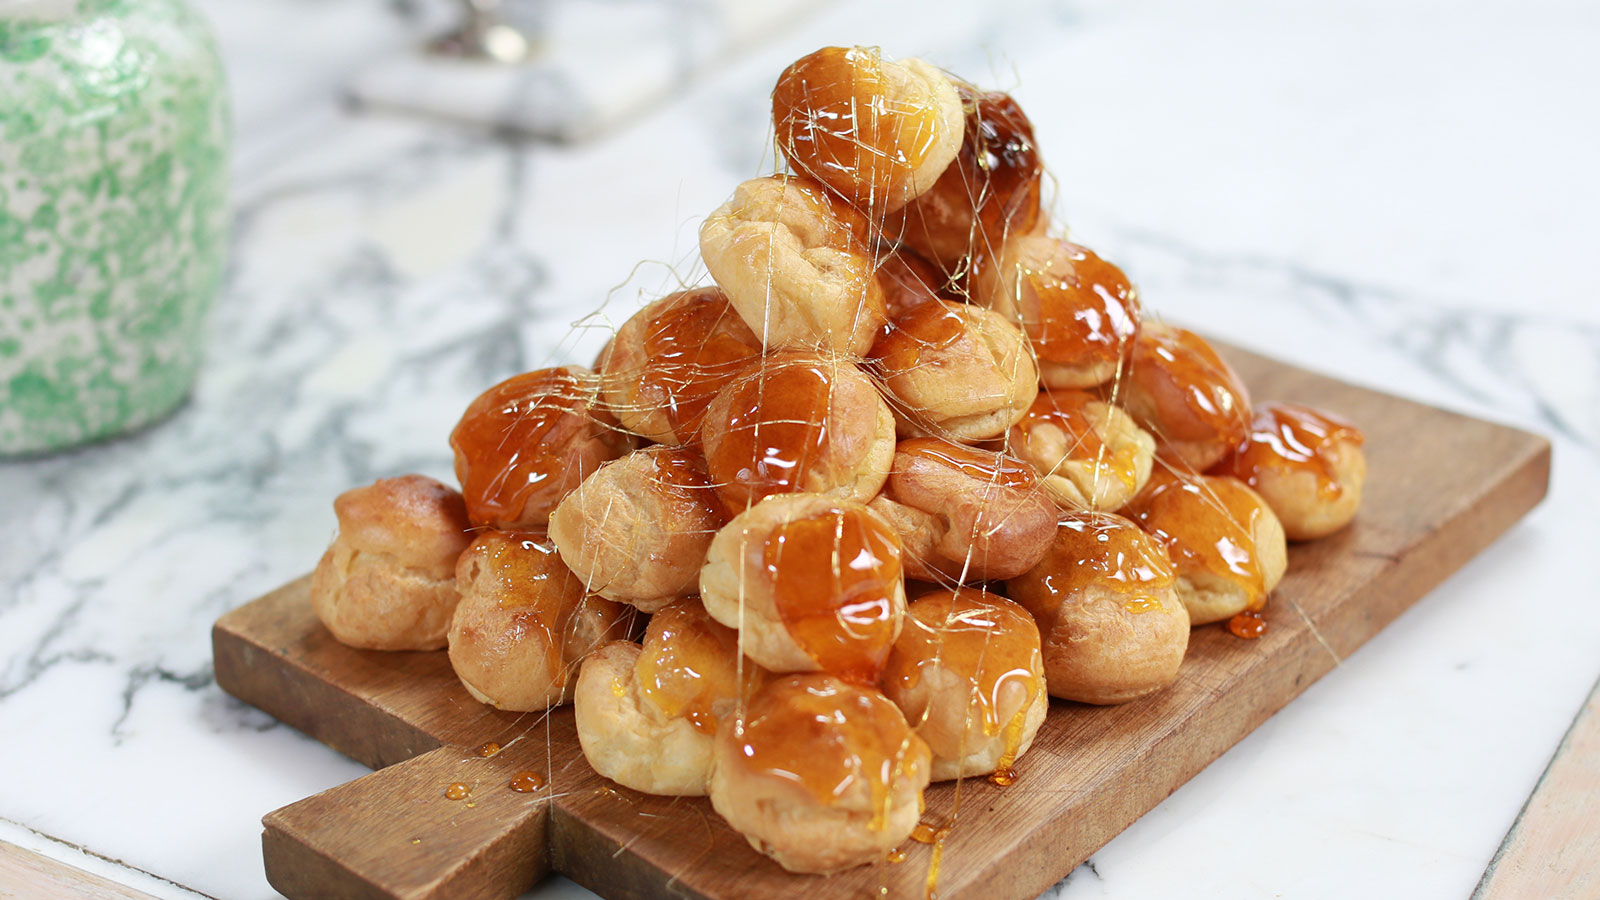 Eat a 🥂 Bougie Brunch and We’ll Determine What 🎉 Holiday Matches Your Vibe Croquembouche